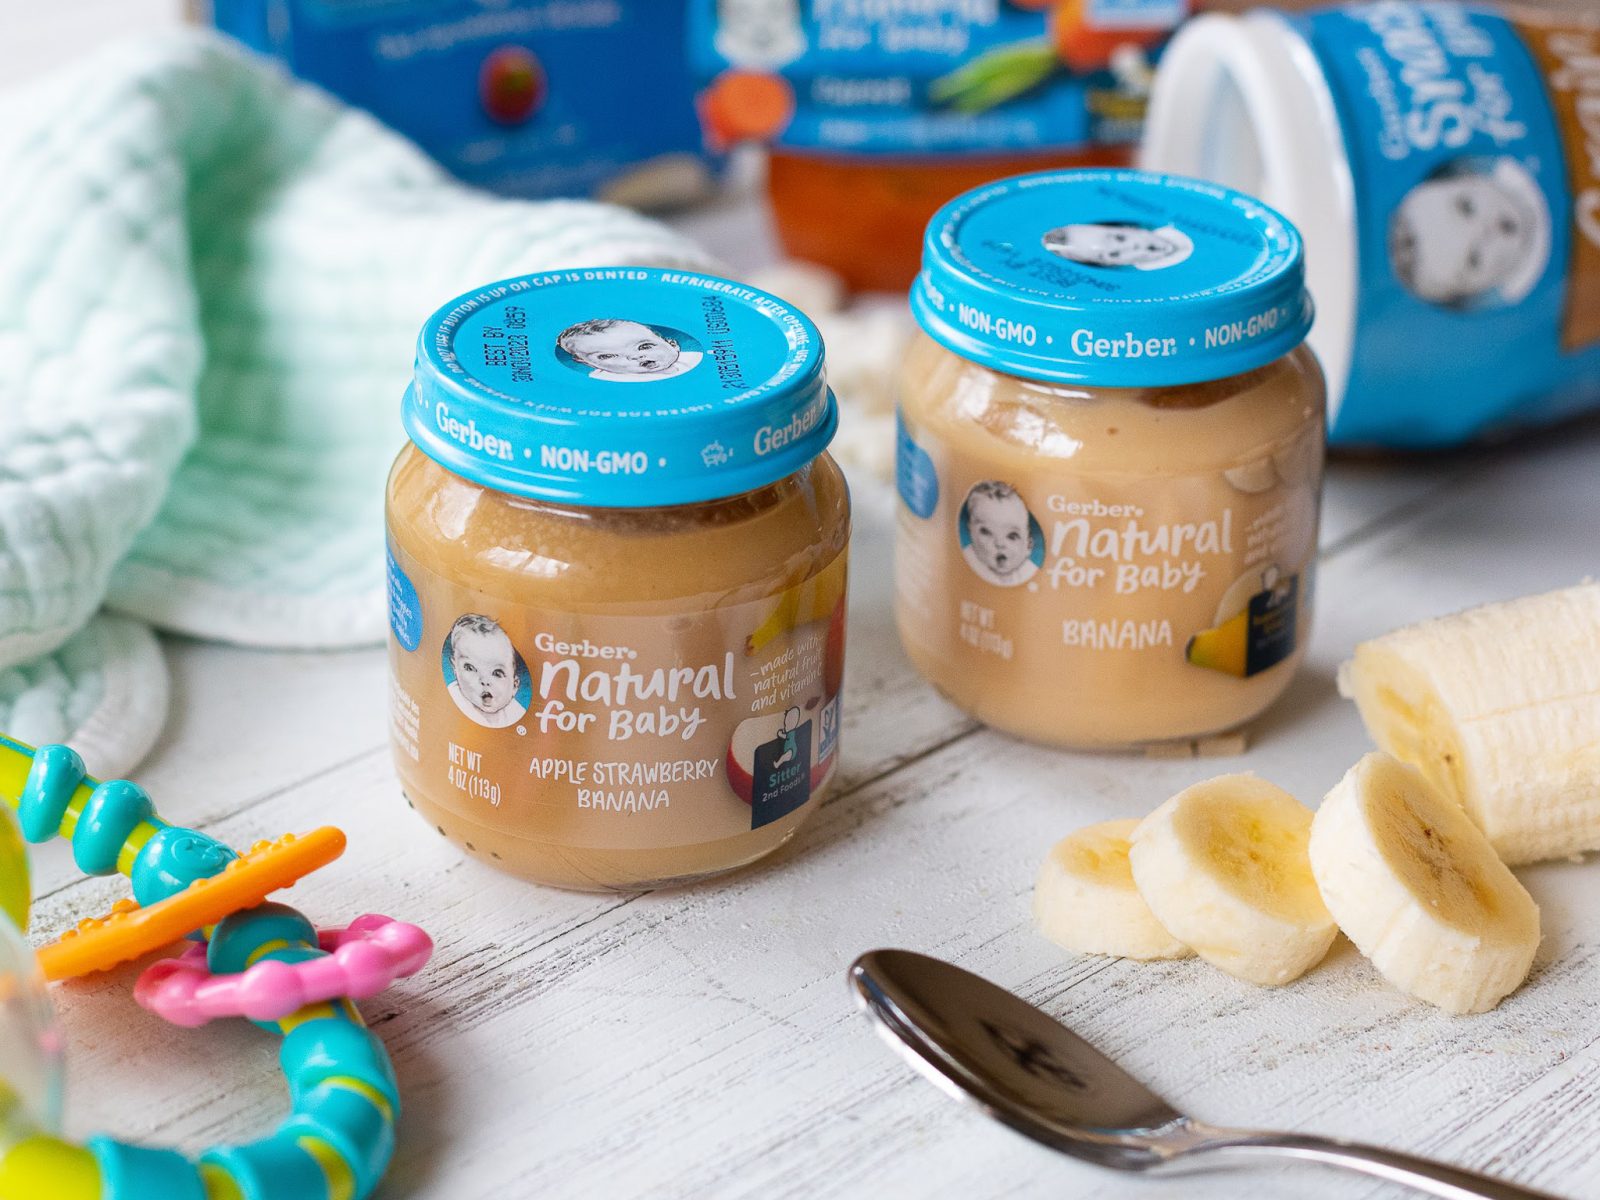 Gerber Baby Food As Low As 38¢ Each At Publix